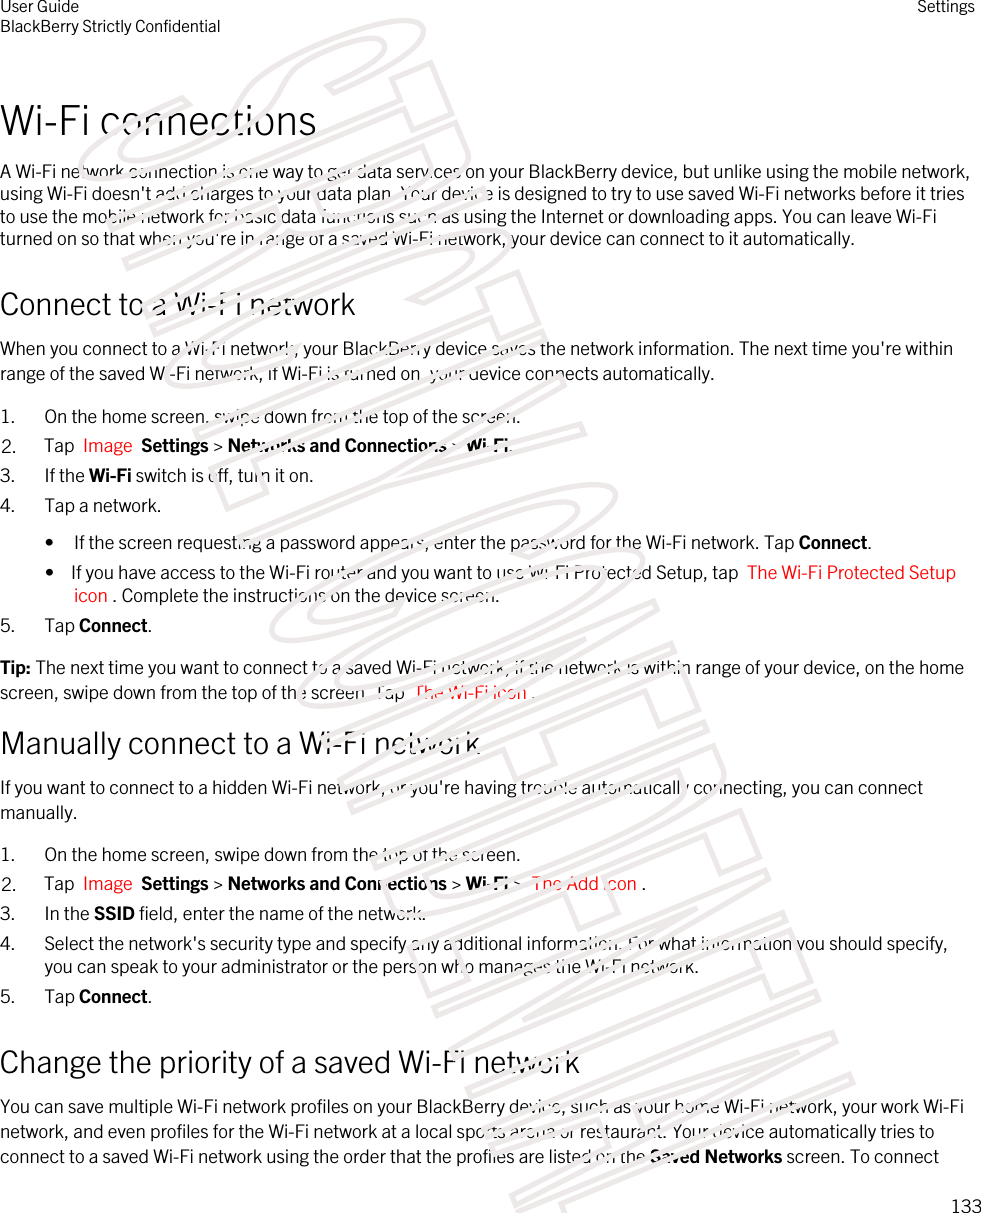 Wi-Fi connectionsA Wi-Fi network connection is one way to get data services on your BlackBerry device, but unlike using the mobile network, using Wi-Fi doesn&apos;t add charges to your data plan. Your device is designed to try to use saved Wi-Fi networks before it tries to use the mobile network for basic data functions such as using the Internet or downloading apps. You can leave Wi-Fi turned on so that when you&apos;re in range of a saved Wi-Fi network, your device can connect to it automatically.Connect to a Wi-Fi networkWhen you connect to a Wi-Fi network, your BlackBerry device saves the network information. The next time you&apos;re within range of the saved Wi-Fi network, if Wi-Fi is turned on, your device connects automatically.1. On the home screen, swipe down from the top of the screen.2. Tap  Image  Settings &gt; Networks and Connections &gt; Wi-Fi.3. If the Wi-Fi switch is off, turn it on.4. Tap a network.• If the screen requesting a password appears, enter the password for the Wi-Fi network. Tap Connect.•  If you have access to the Wi-Fi router and you want to use Wi-Fi Protected Setup, tap  The Wi-Fi Protected Setup icon . Complete the instructions on the device screen.5. Tap Connect.Tip: The next time you want to connect to a saved Wi-Fi network, if the network is within range of your device, on the home screen, swipe down from the top of the screen. Tap  The Wi-Fi icon .Manually connect to a Wi-Fi networkIf you want to connect to a hidden Wi-Fi network, or you&apos;re having trouble automatically connecting, you can connect manually.1. On the home screen, swipe down from the top of the screen.2. Tap  Image  Settings &gt; Networks and Connections &gt; Wi-Fi &gt;  The Add icon .3. In the SSID field, enter the name of the network.4. Select the network&apos;s security type and specify any additional information. For what information you should specify, you can speak to your administrator or the person who manages the Wi-Fi network.5. Tap Connect.Change the priority of a saved Wi-Fi networkYou can save multiple Wi-Fi network profiles on your BlackBerry device, such as your home Wi-Fi network, your work Wi-Fi network, and even profiles for the Wi-Fi network at a local sports arena or restaurant. Your device automatically tries to connect to a saved Wi-Fi network using the order that the profiles are listed on the Saved Networks screen. To connect User GuideBlackBerry Strictly Confidential Settings133STRICTLY CONFIDENTIAL